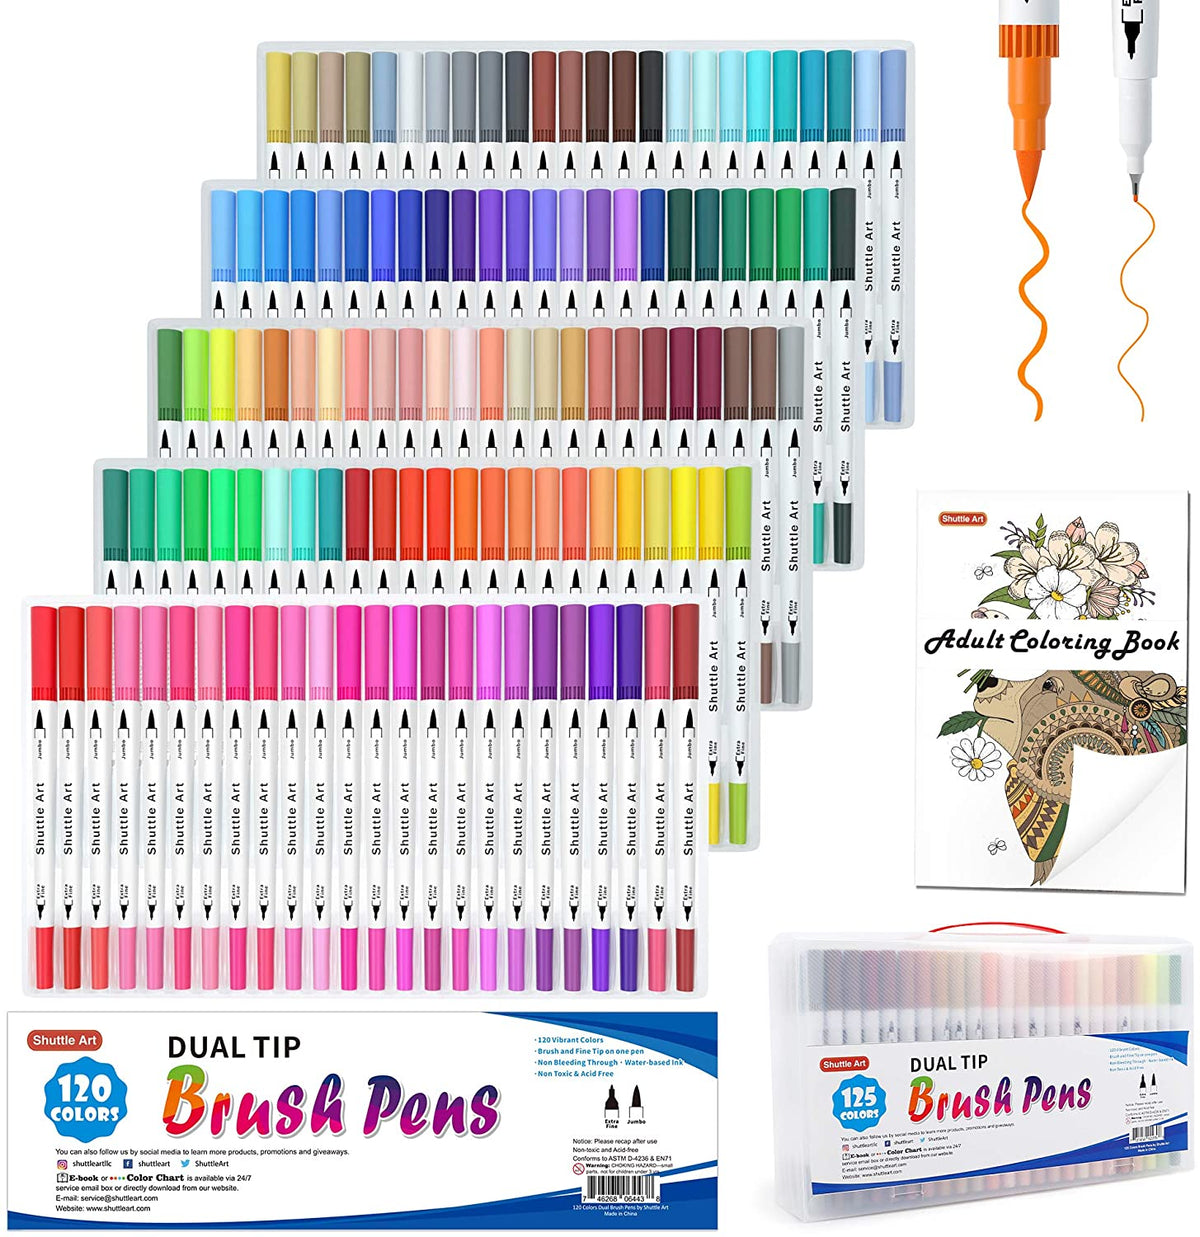 Dual Tip Brush Pens, Coloring Pens for Adults Coloring Books